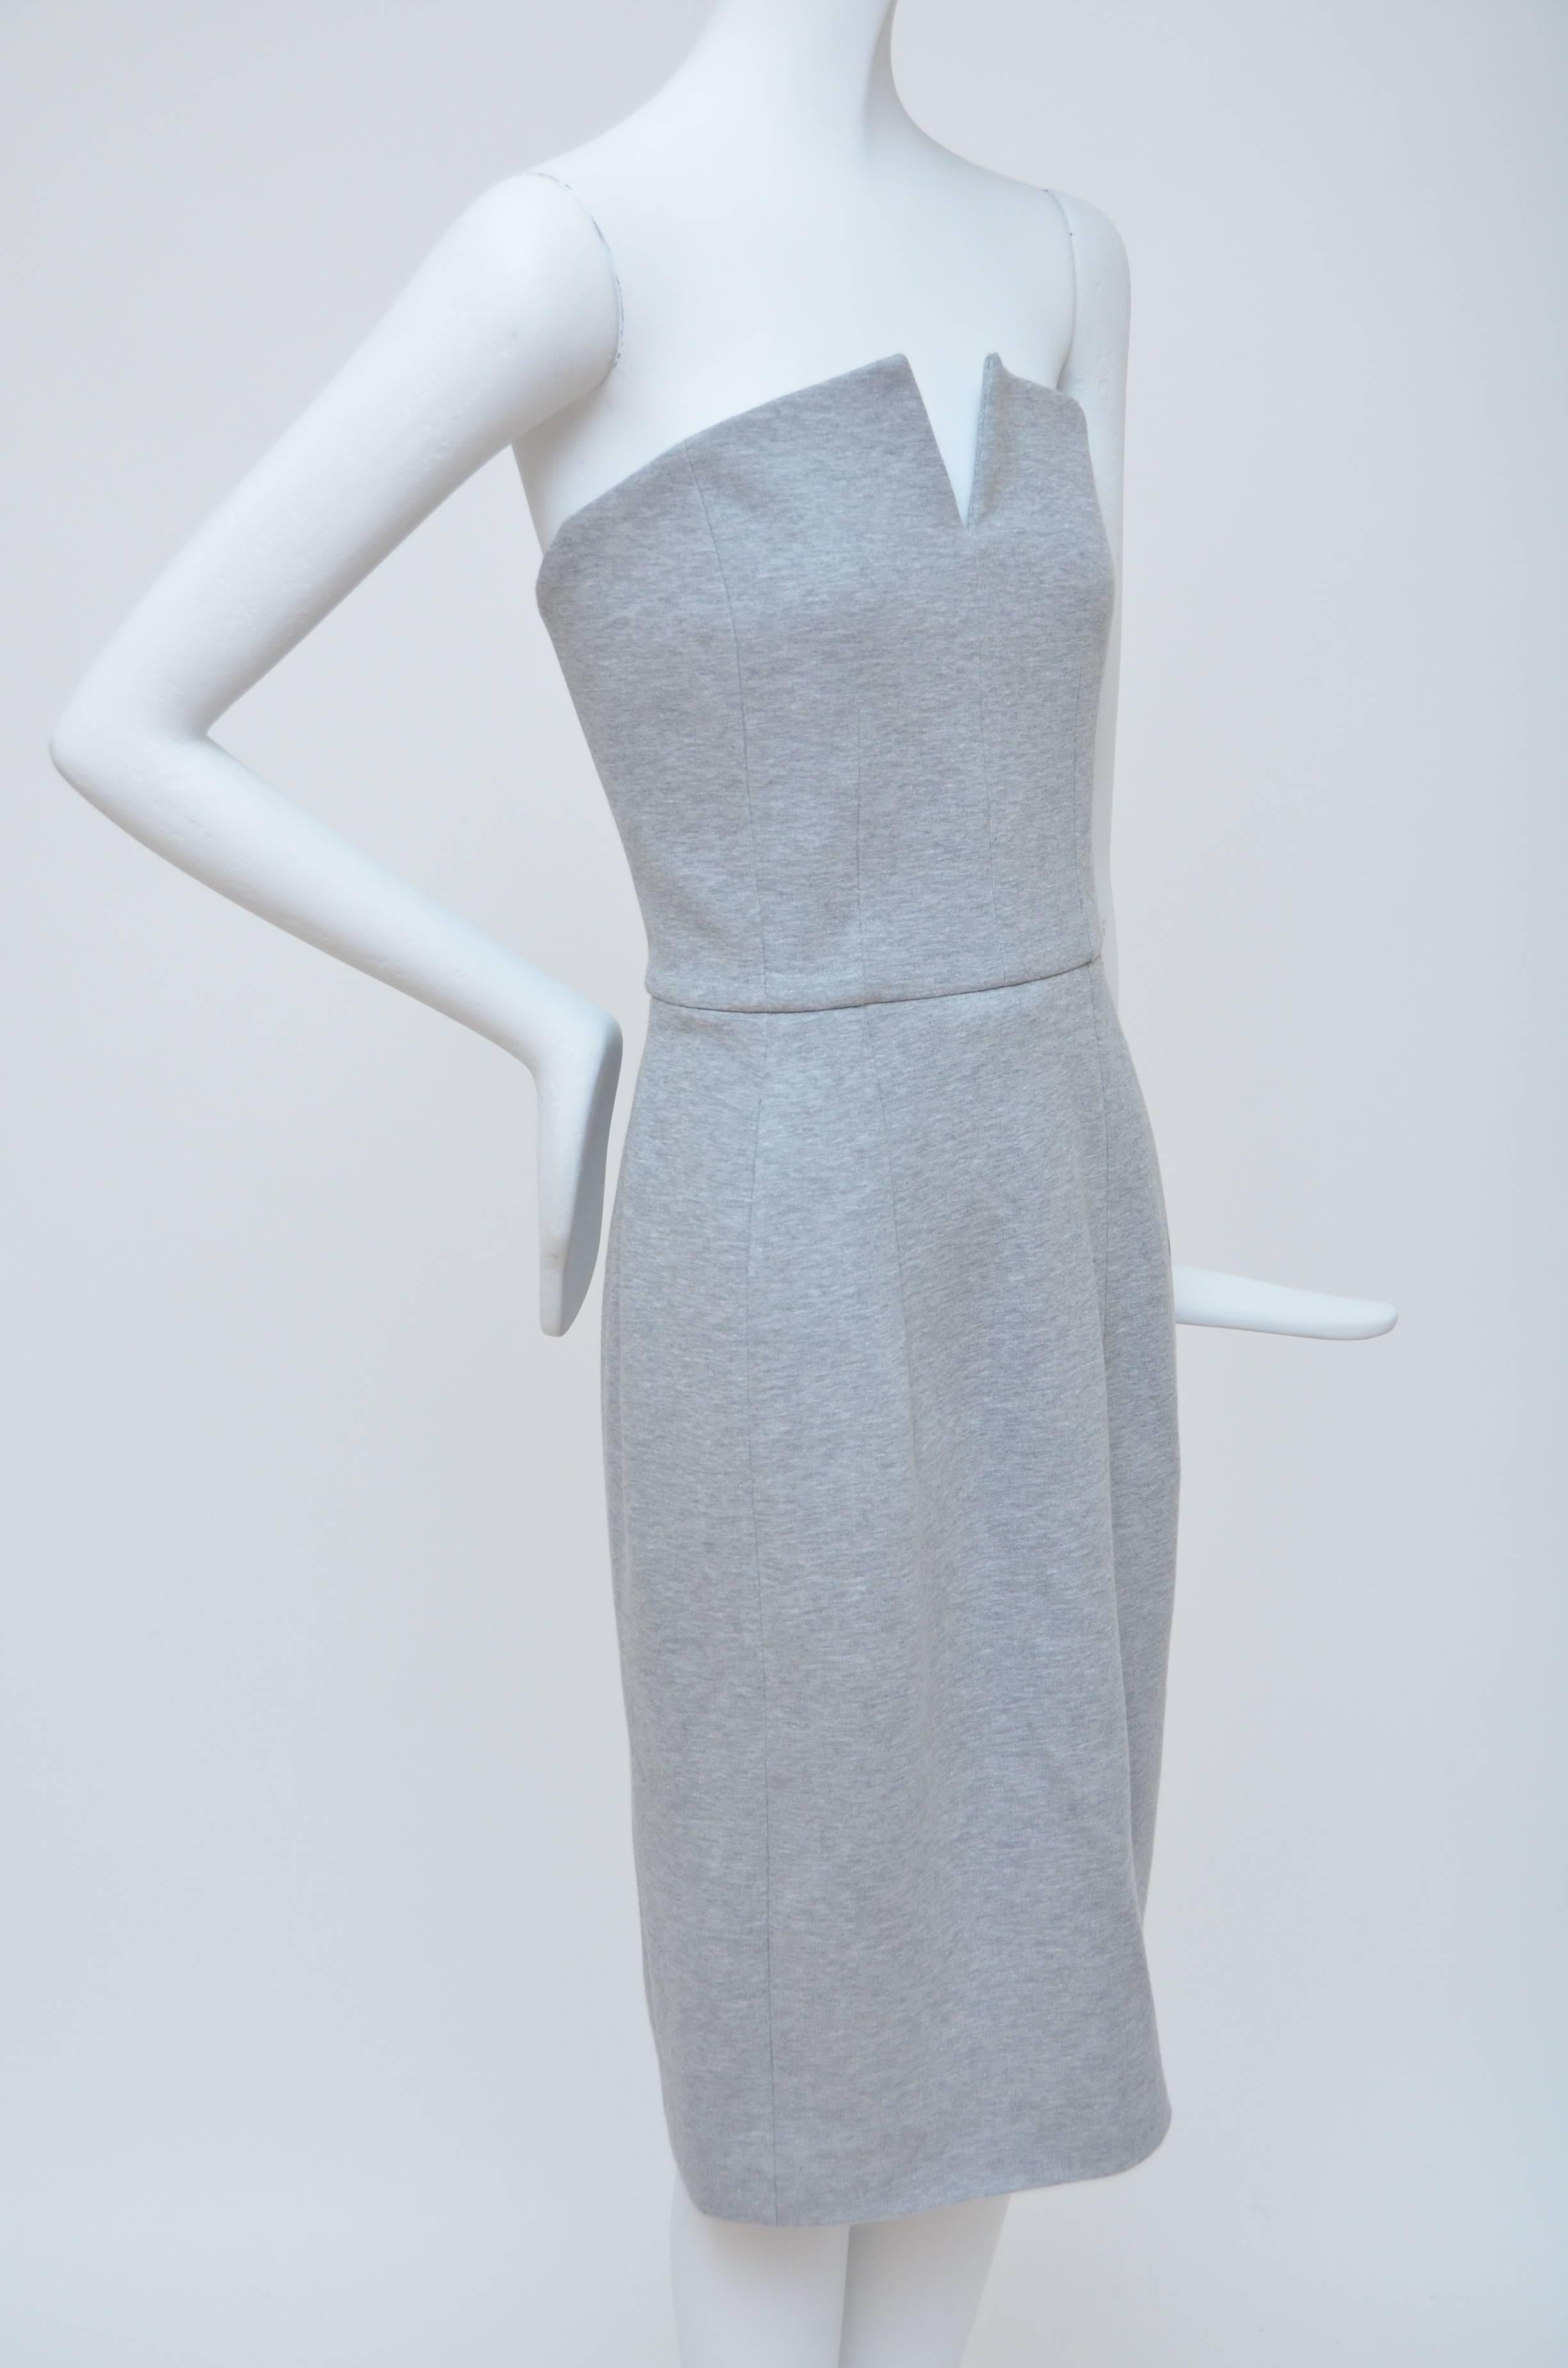 Grey Yves Saint Laurent strapless  dress with tonal stitching throughout and concealed zip closure at back.
Seen on the best dressed as Rihanna,Kate Moss ,Gwyneth Paltrow,Julianne Mooree.....
Unlimited possibilities to wear this special